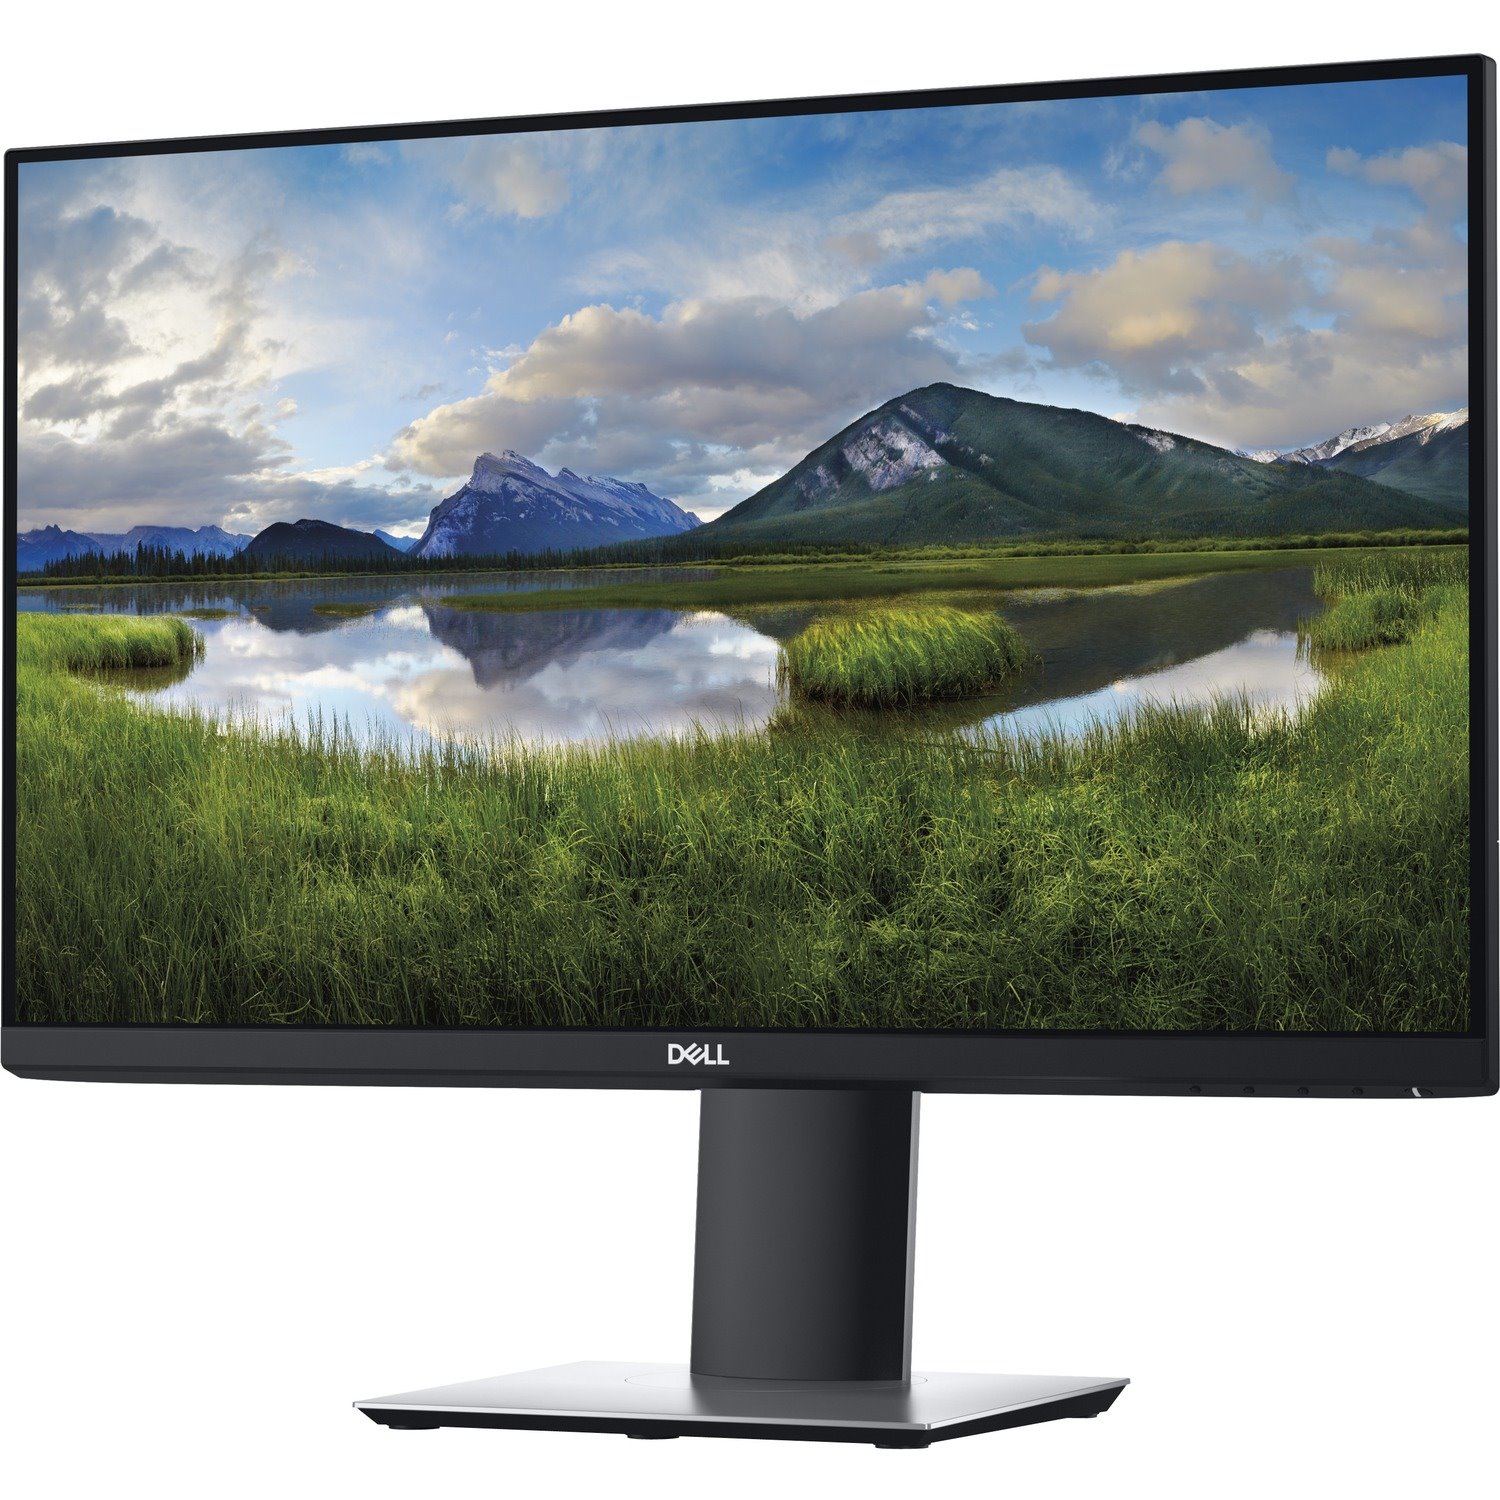 Dell-IMSourcing P2419H 23.8" Full HD LED LCD Monitor - 16:9 - Black, Gray